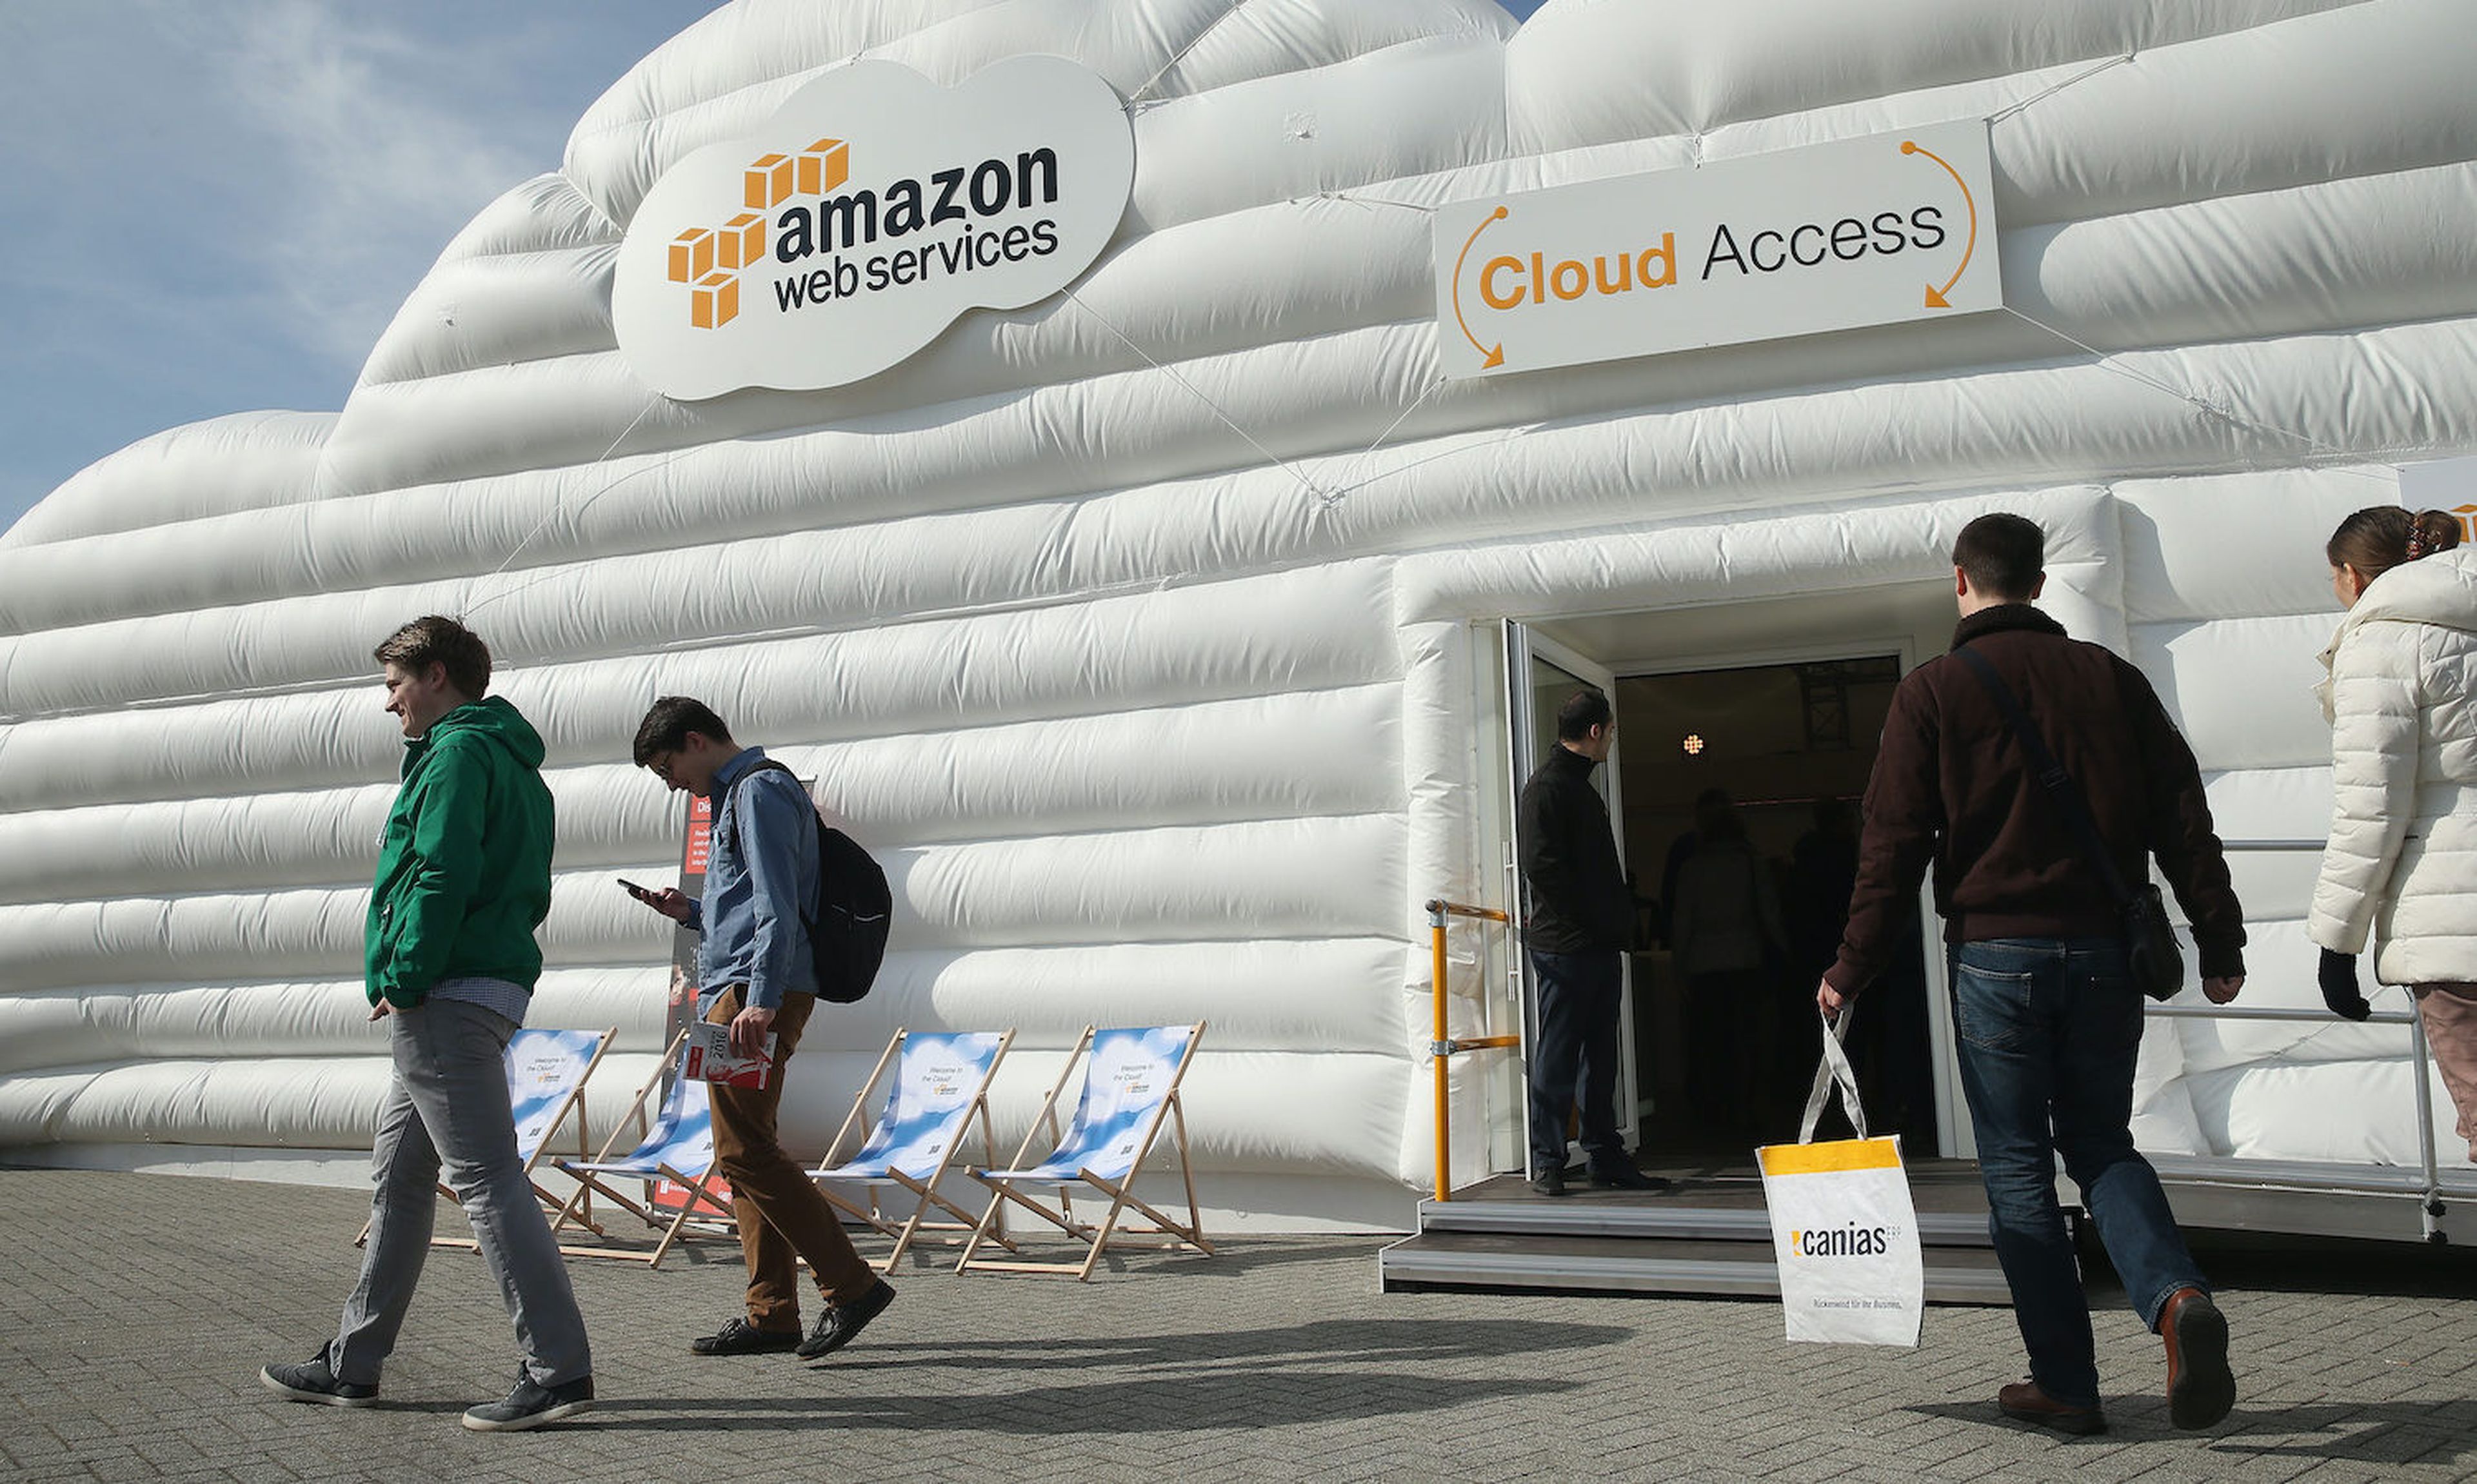 Visitors arrive at the cloud pavilion of Amazon Web Services at the 2016 CeBIT digital technology trade fair in Hanover, Germany. Researchers found a flaw in Amazon Kindle devices that give an attacker root access, steal sensitive data and turn the device into a malicious bot for future attacks. (Photo by Sean Gallup/Getty Images)